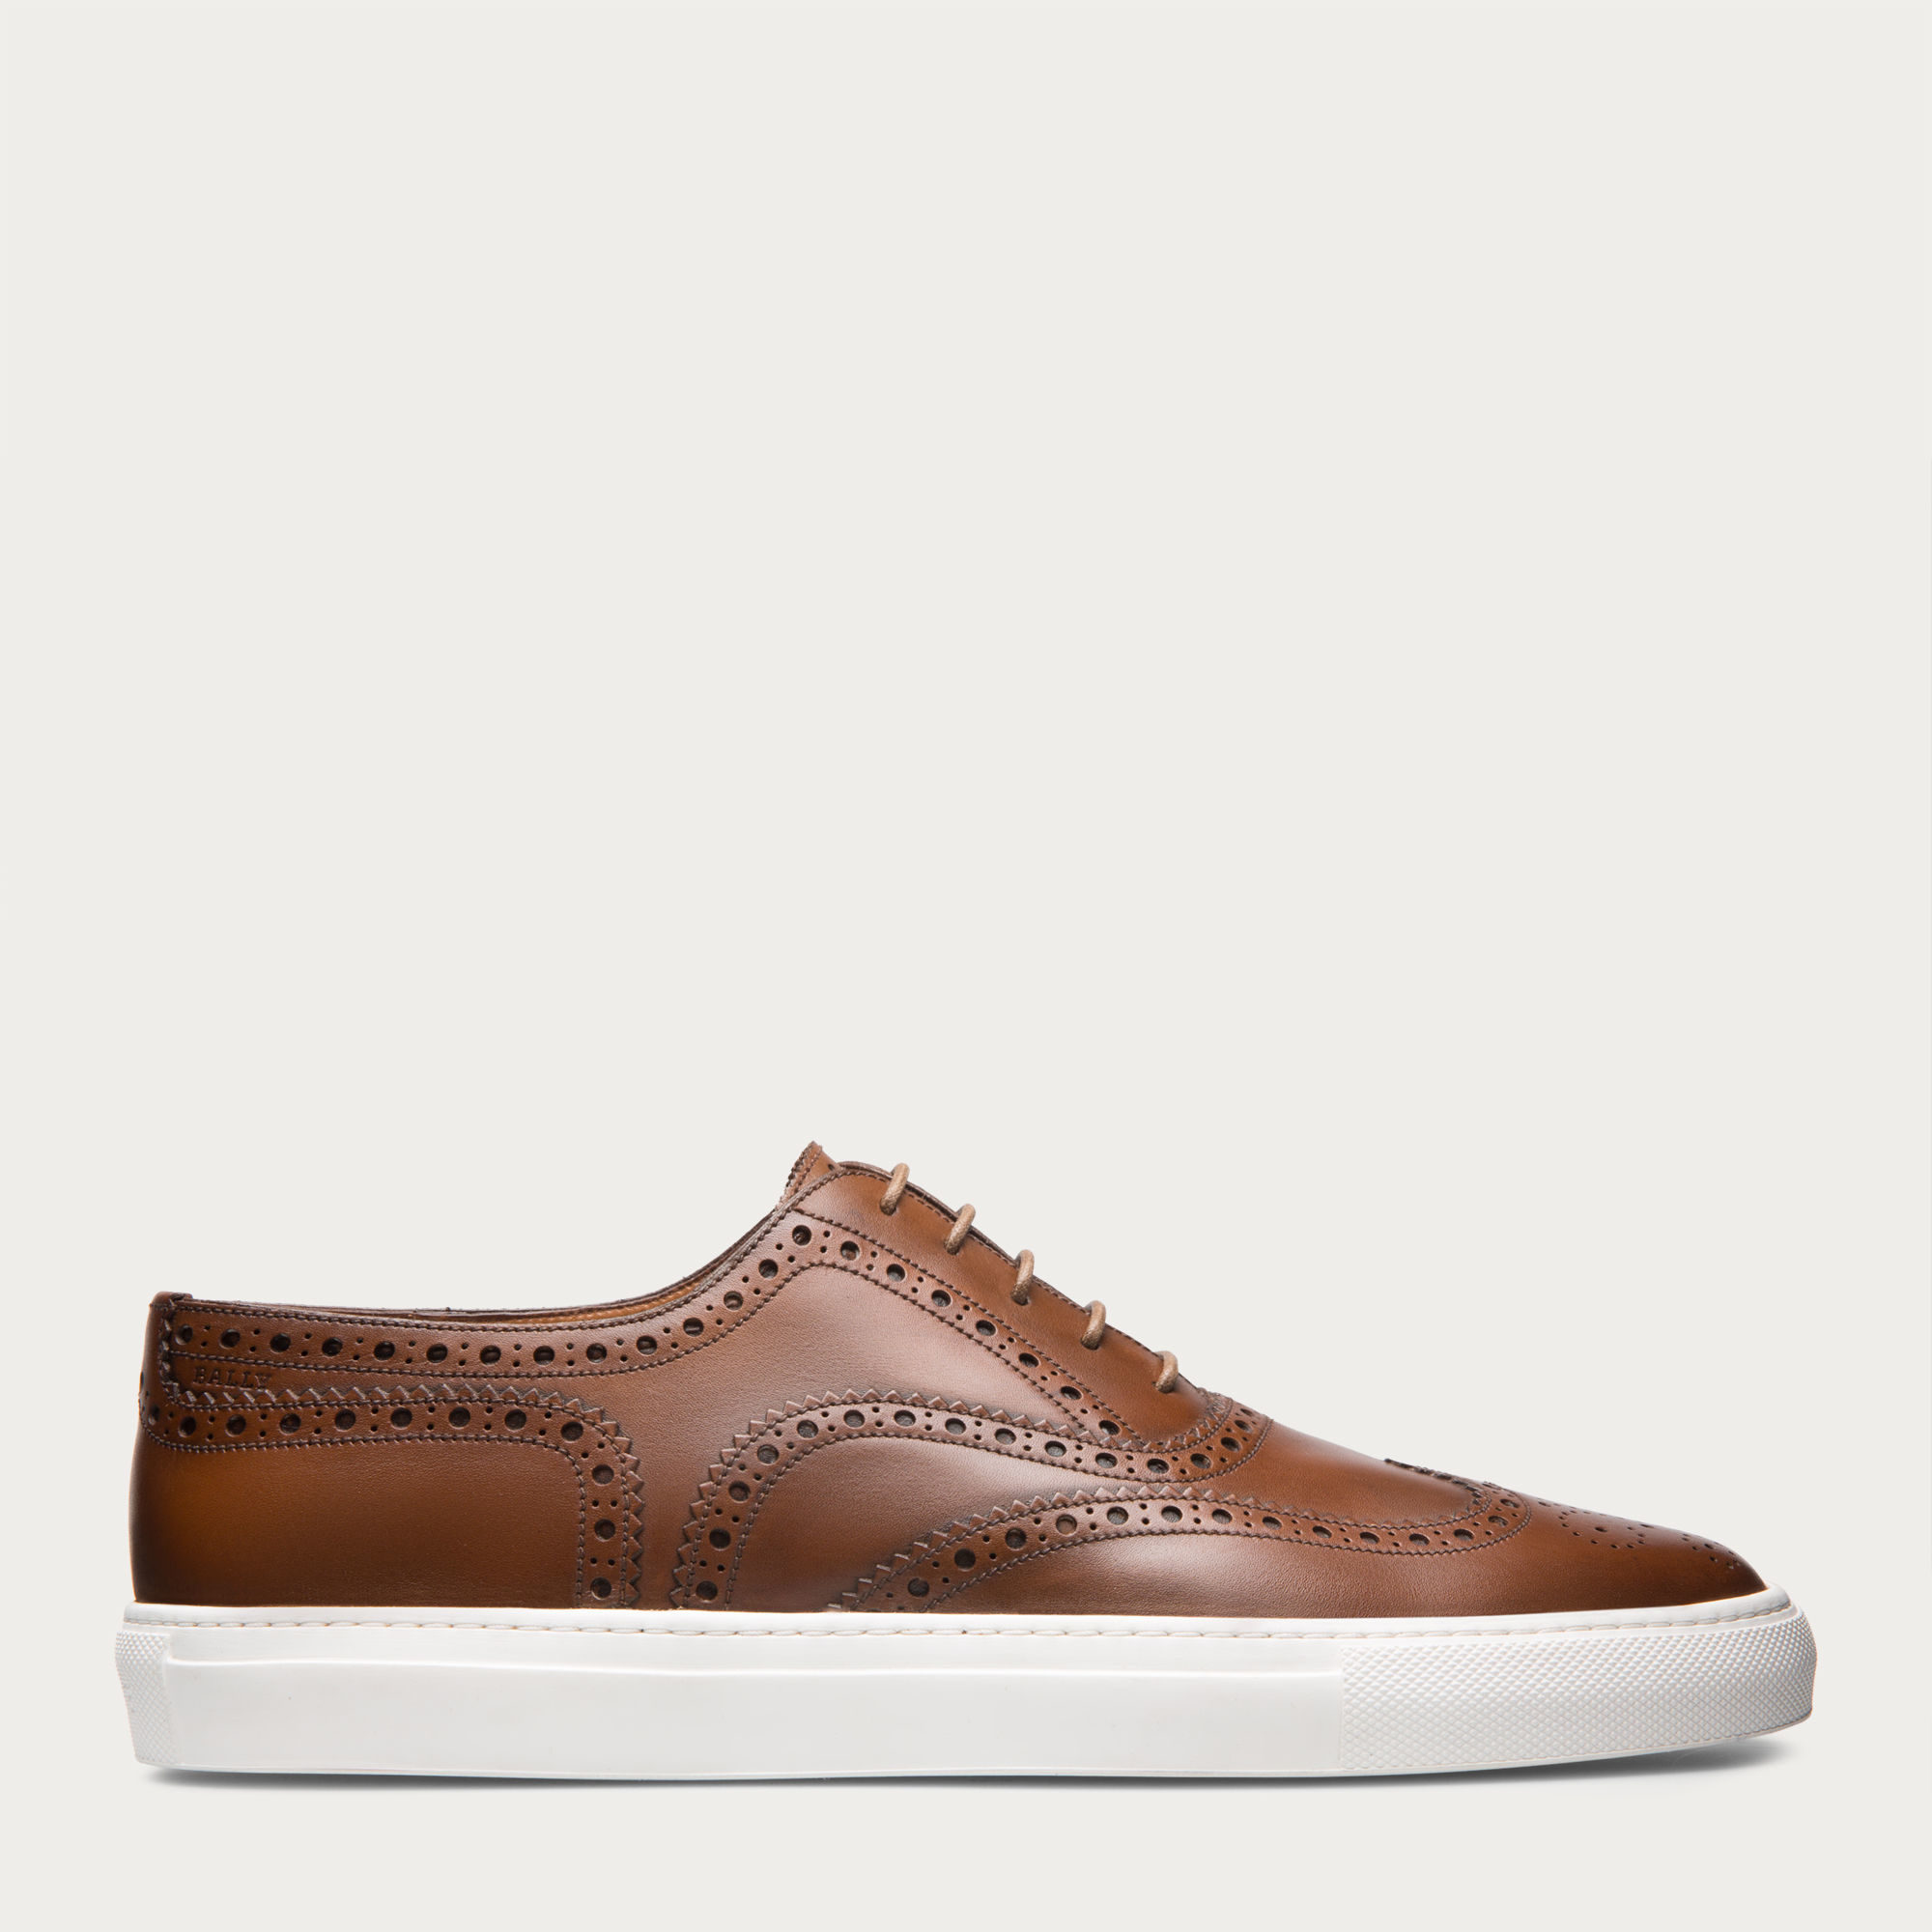 Bally Herico in Tobacco (Brown) for Men - Lyst